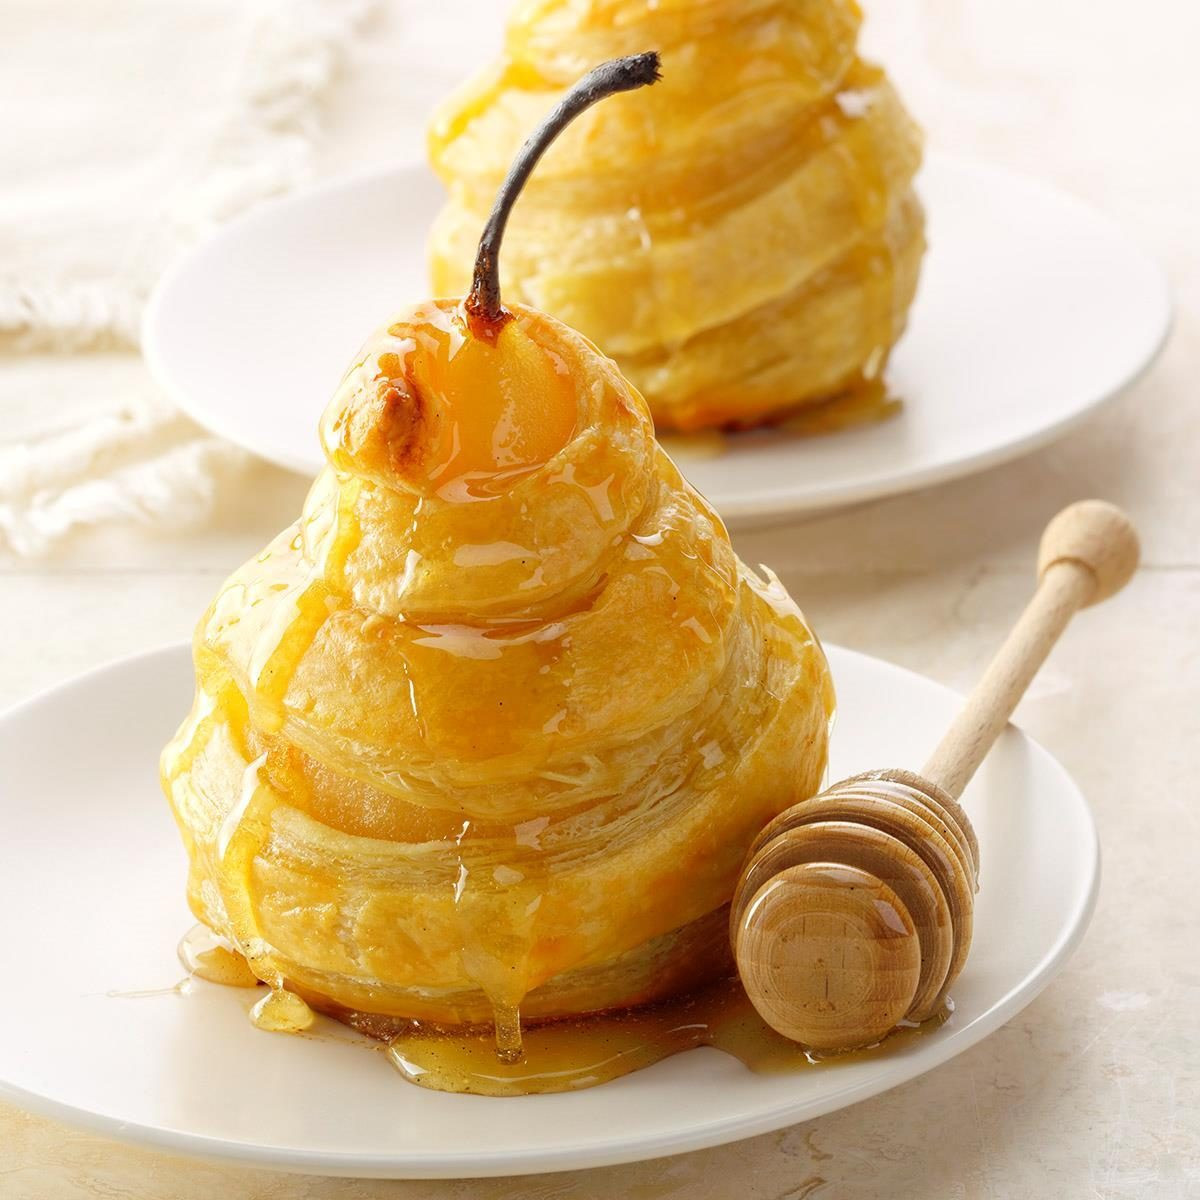 Puff Pastry Dinner Recipes
 Honeyed Pears in Puff Pastry Recipe